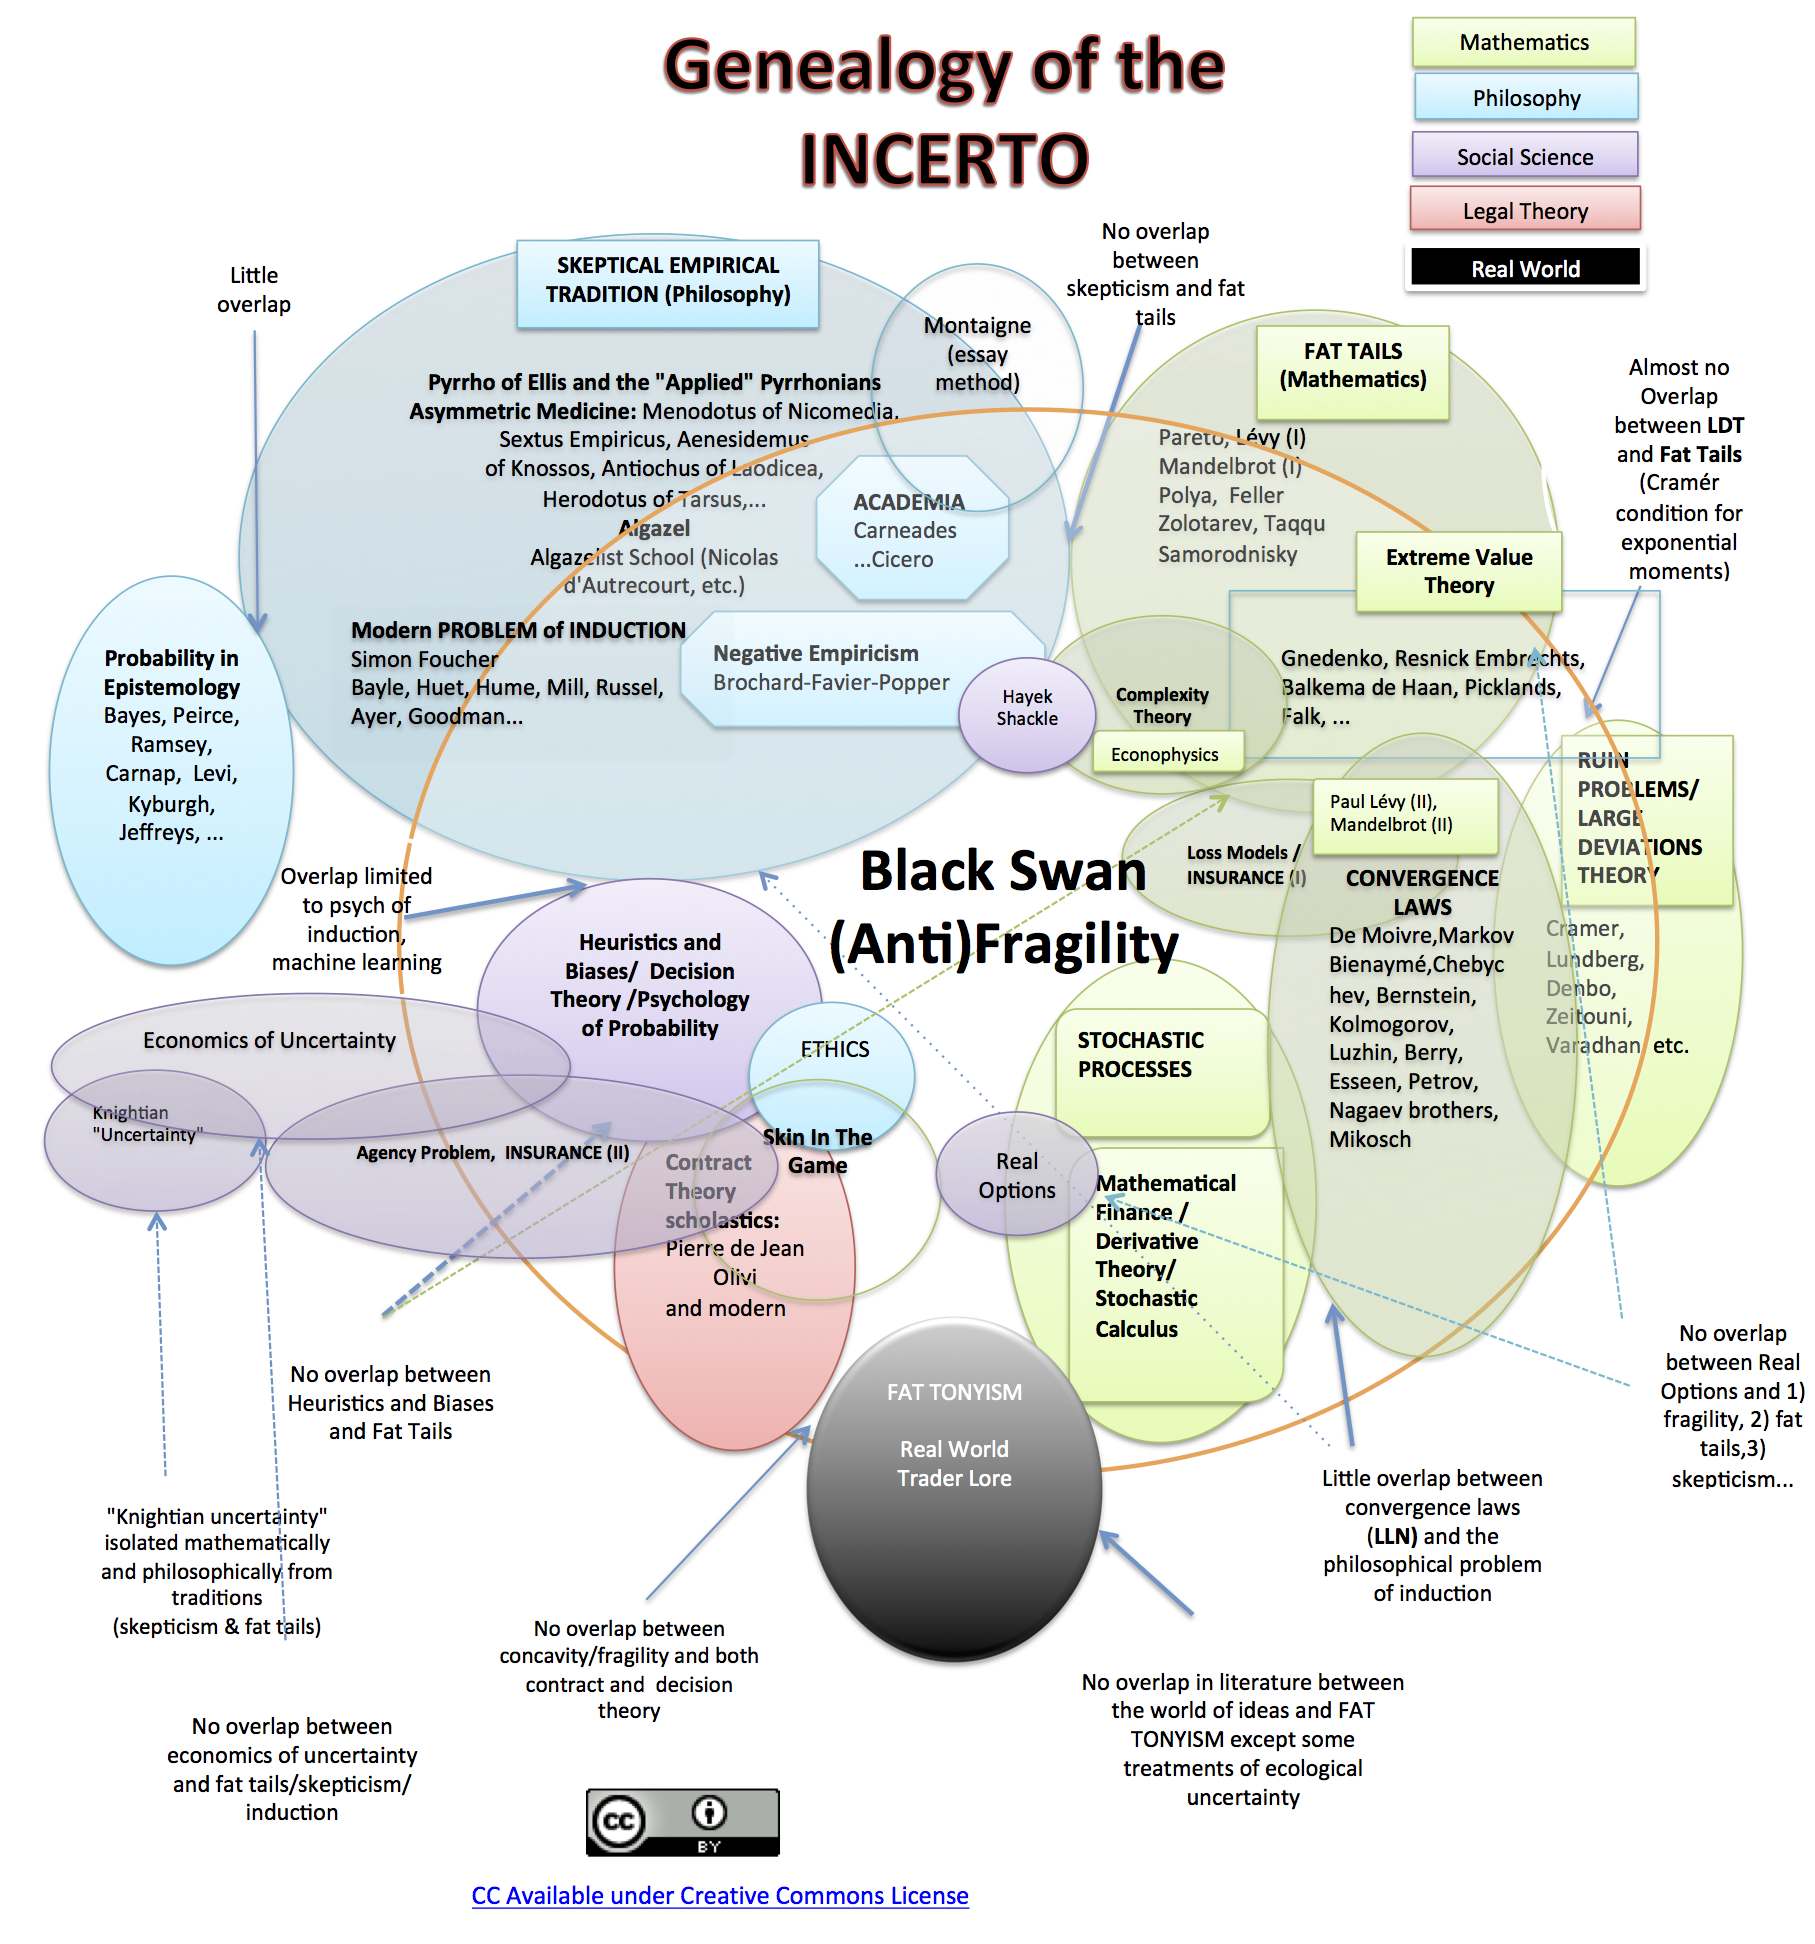 Genealogy of the INCERTO